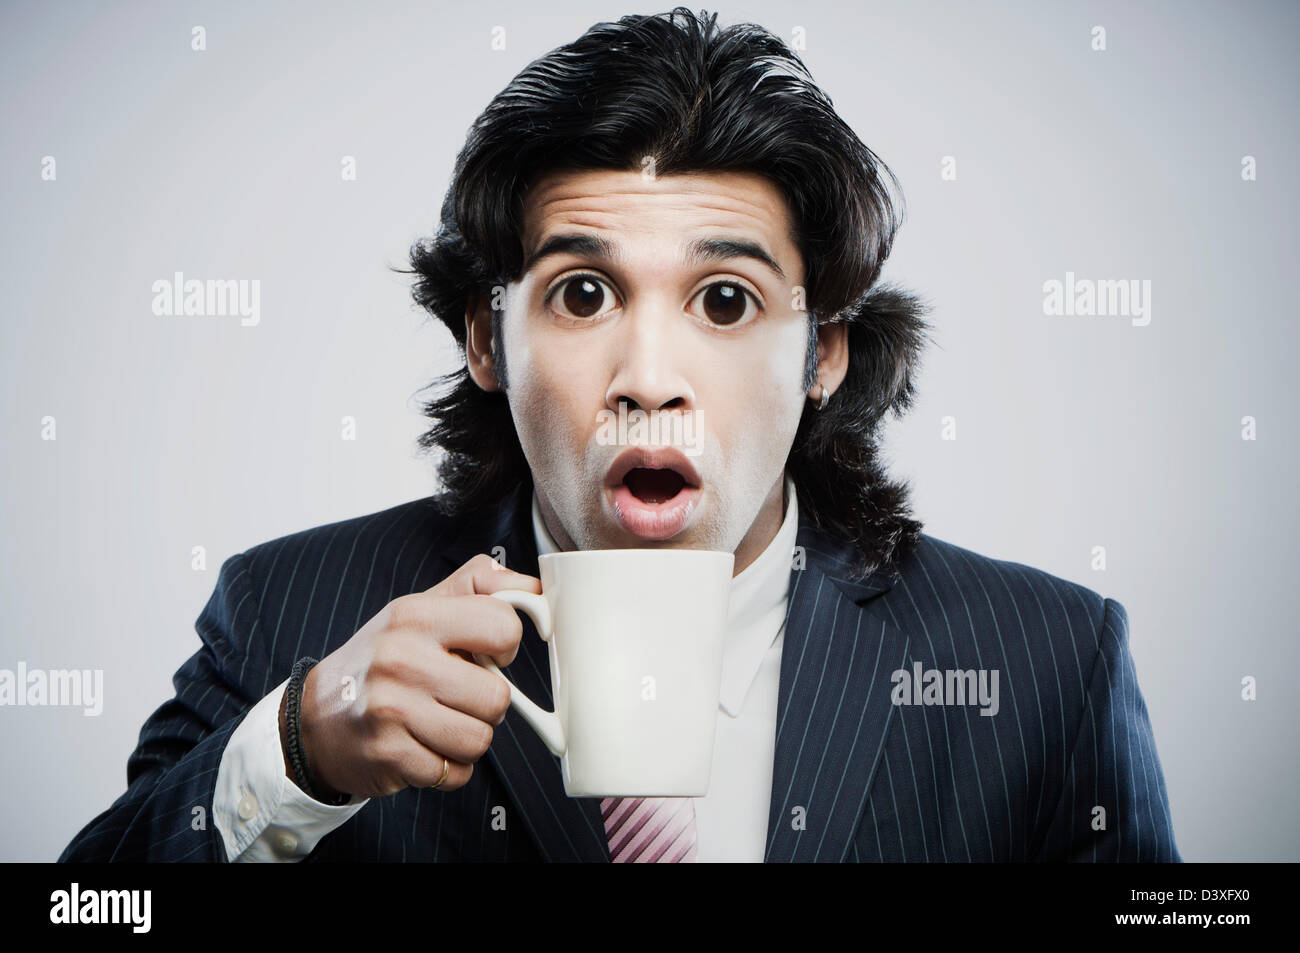 https://c8.alamy.com/comp/D3XFX0/businessman-with-big-eyes-holding-a-cup-of-coffee-D3XFX0.jpg